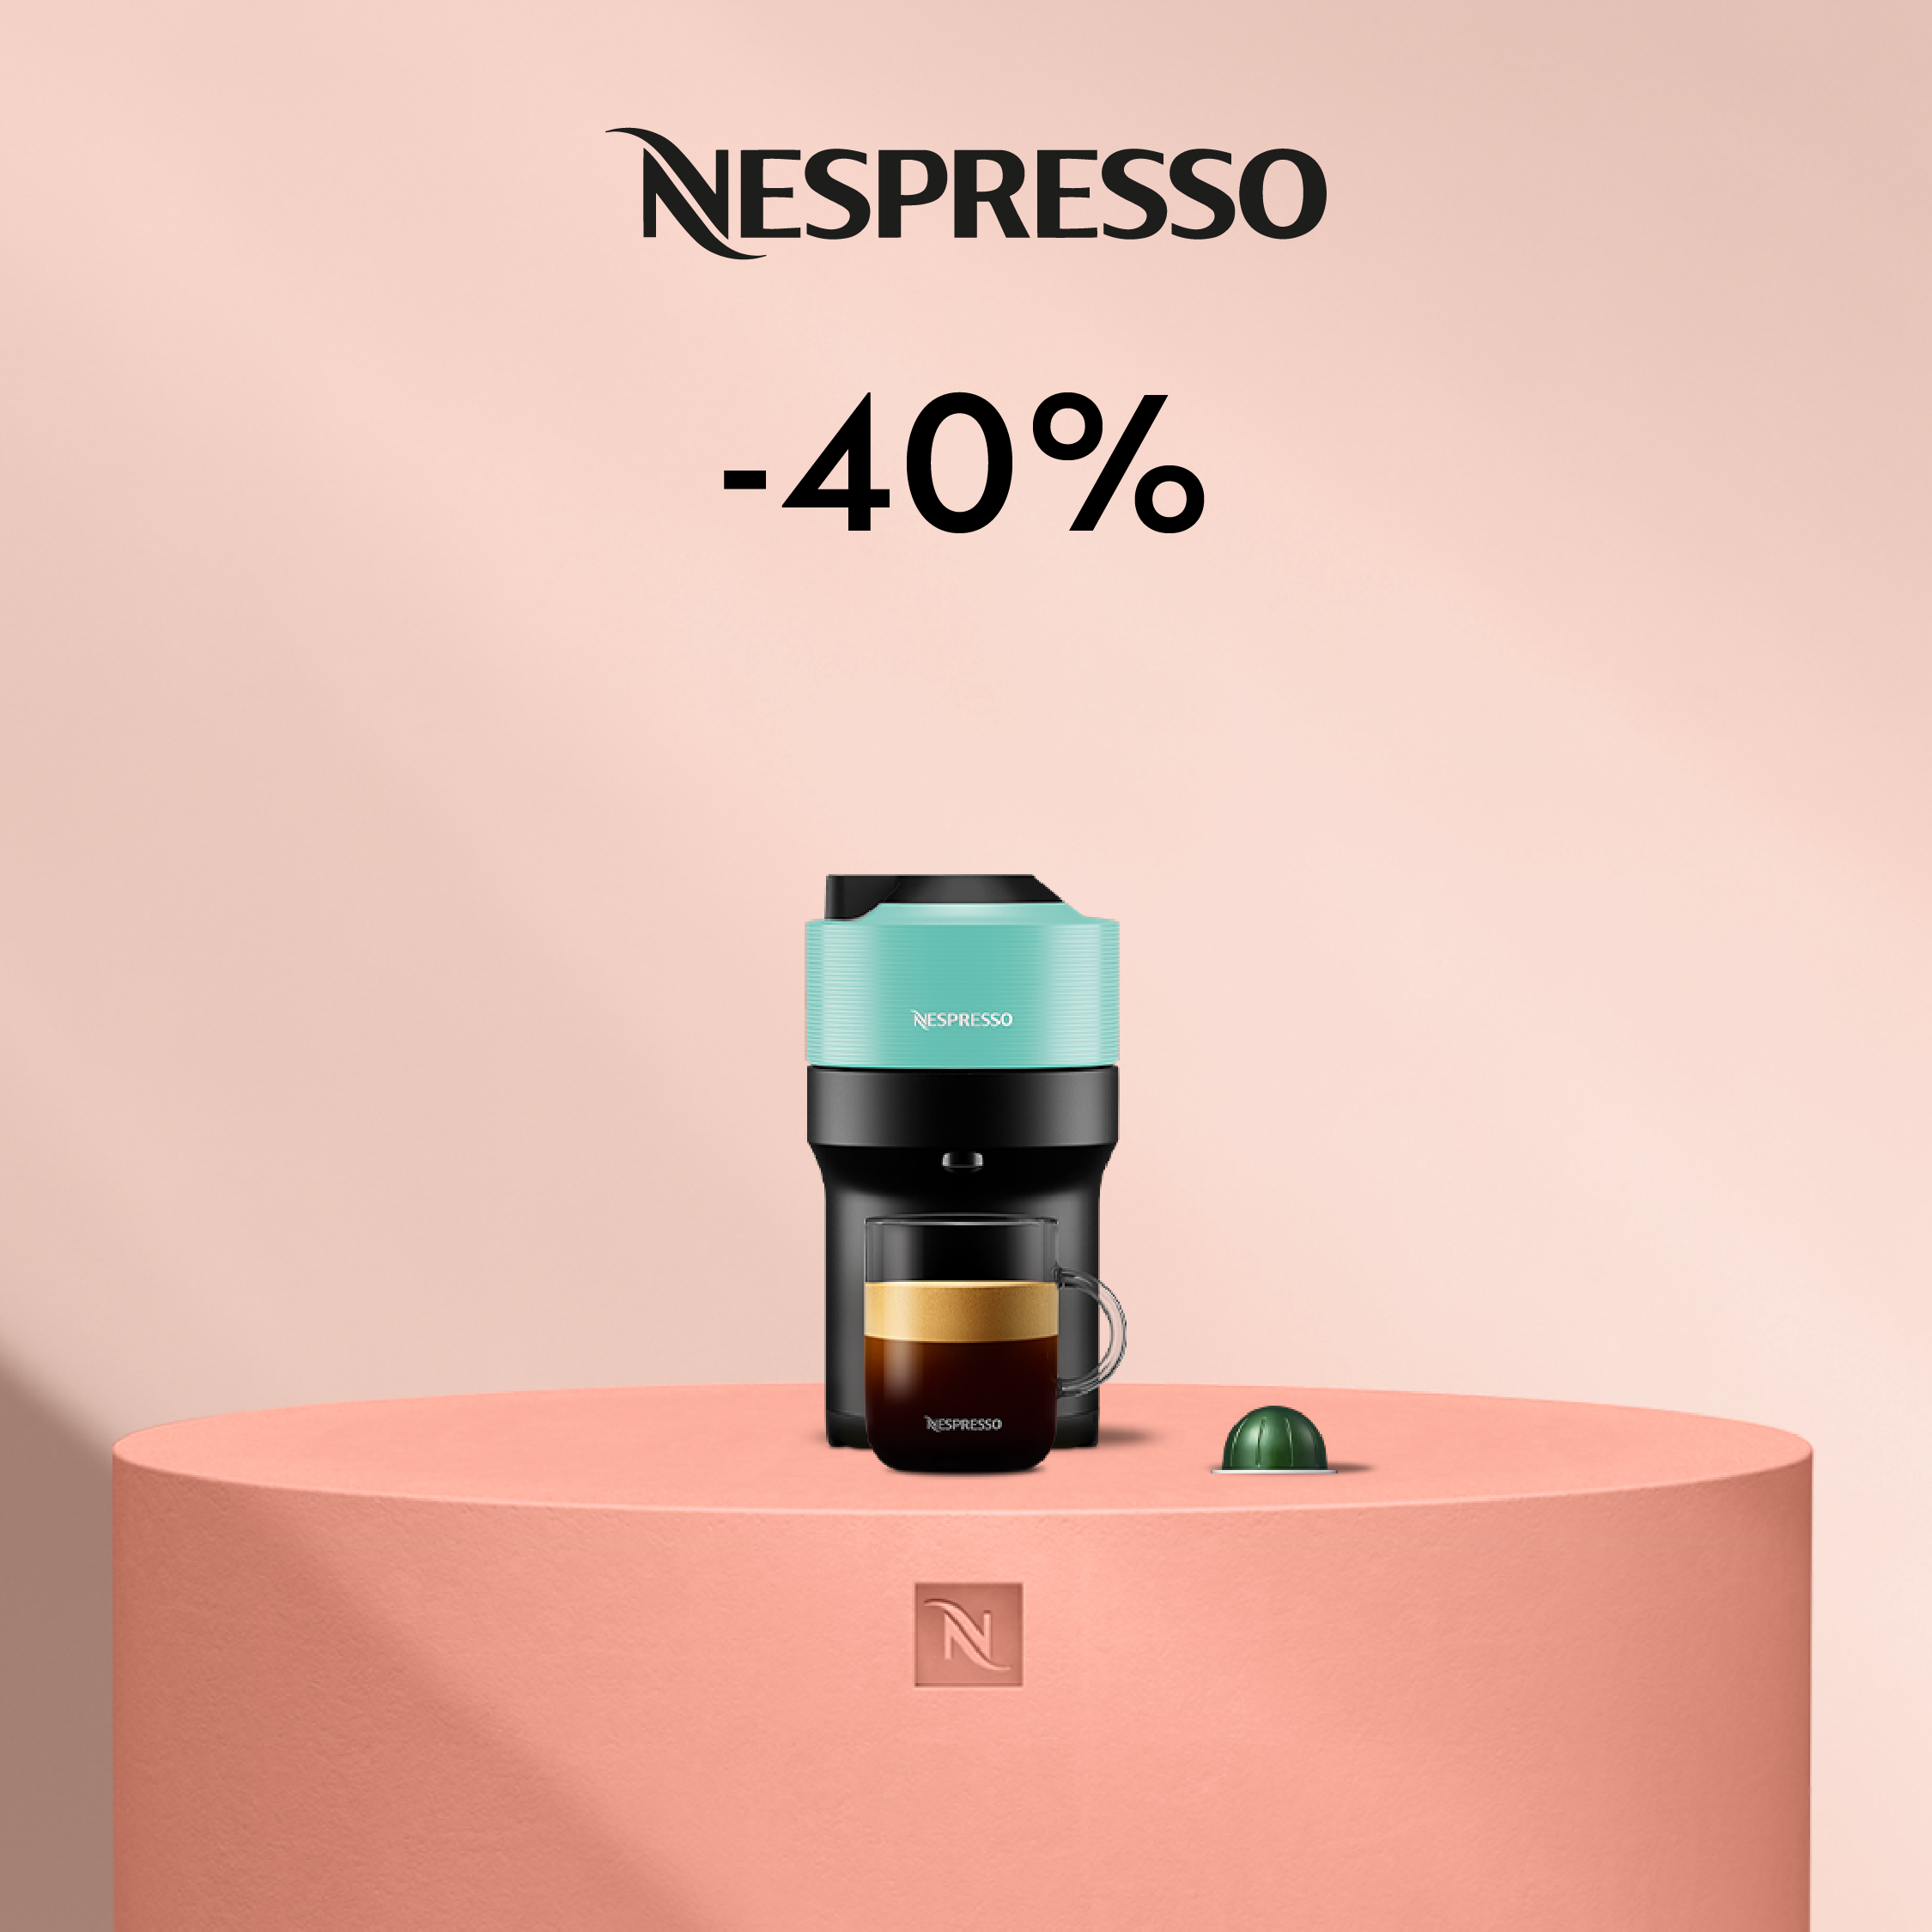 40% DISCOUNT ON THE VERTUO POP COFFEE MACHINE WHEN YOU BUY 80 CAPSULES!